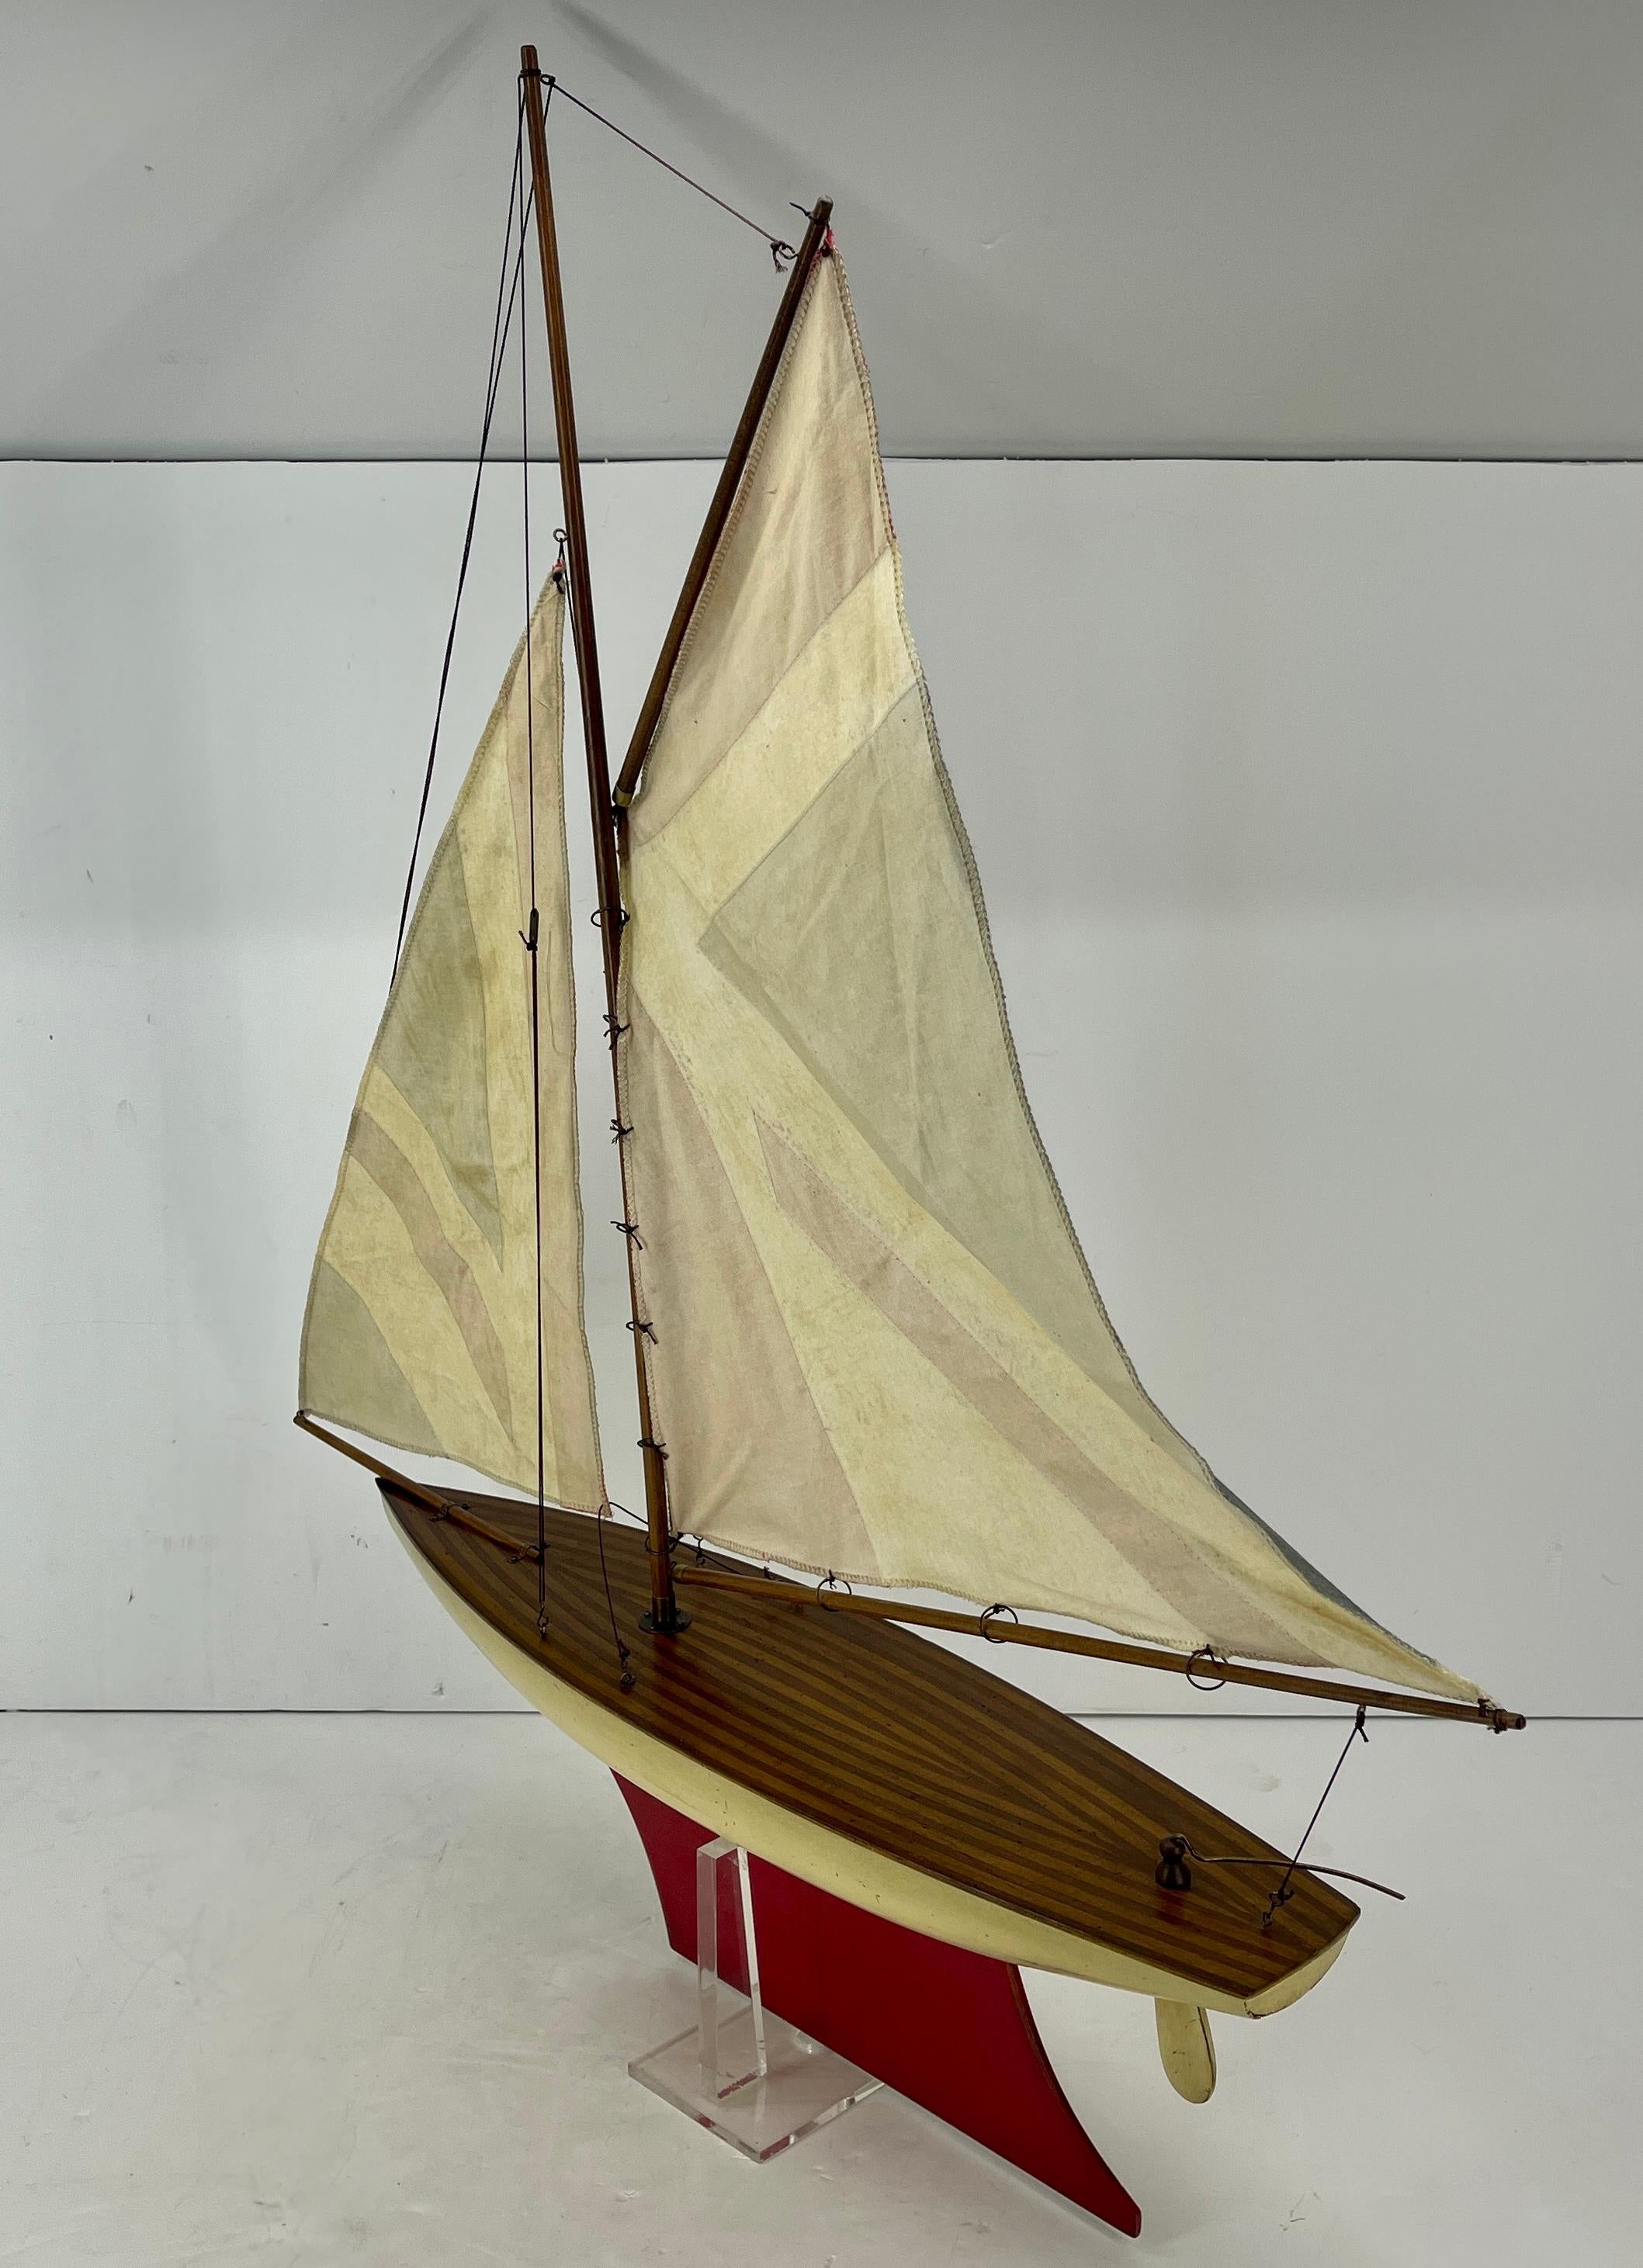 English Carved Wood Sailboat Model with Parquetry Deck and Union Jack Sailcloth 9